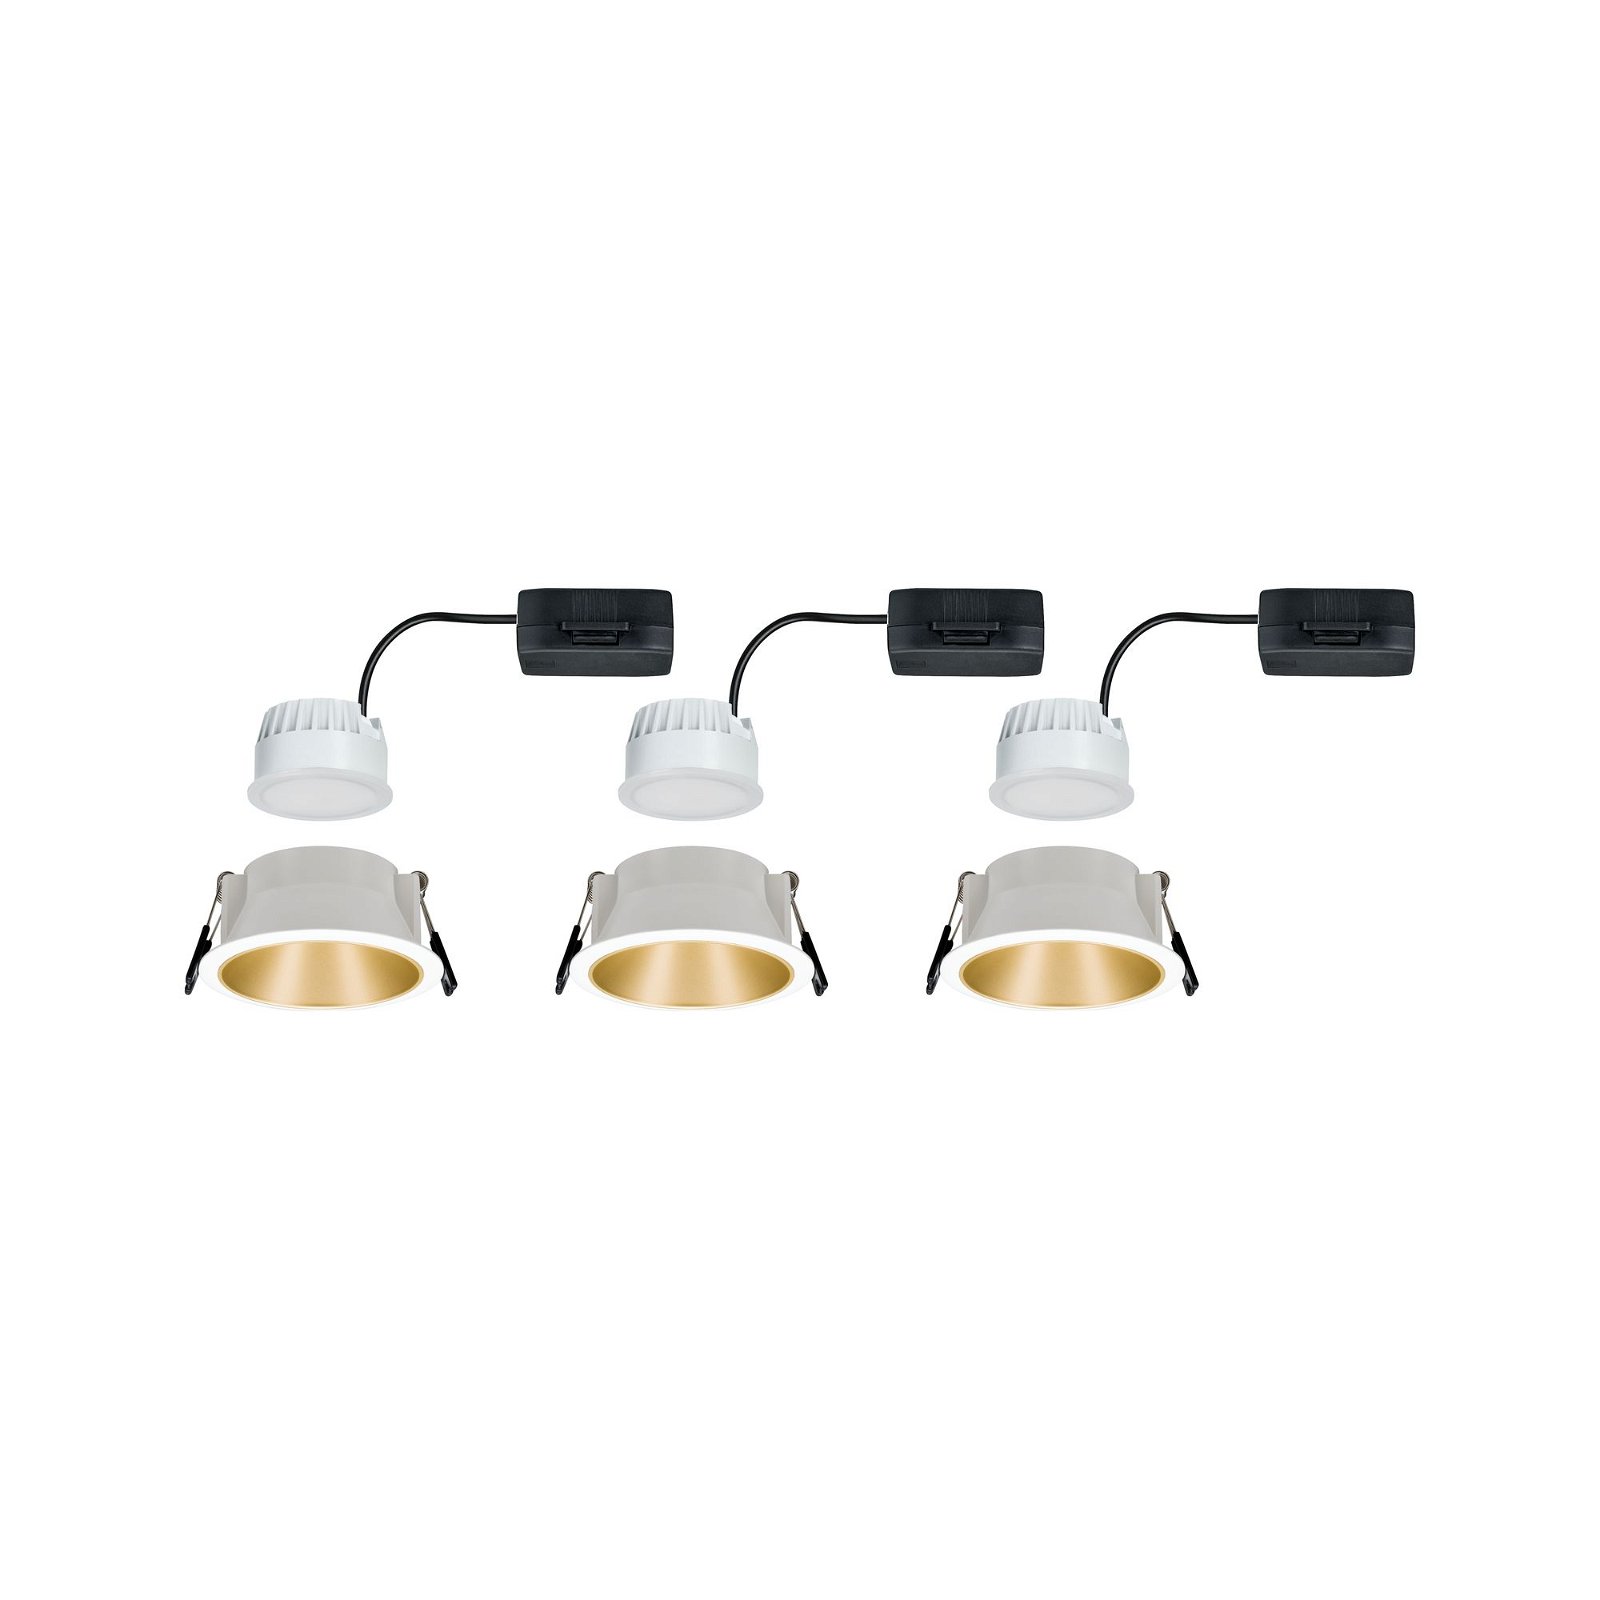 LED Recessed luminaire 3-Step-Dim Cole Coin Basic Set IP44 round 88mm Coin 3x6,5W 3x460lm 230V dimmable 2700K White/Gold matt